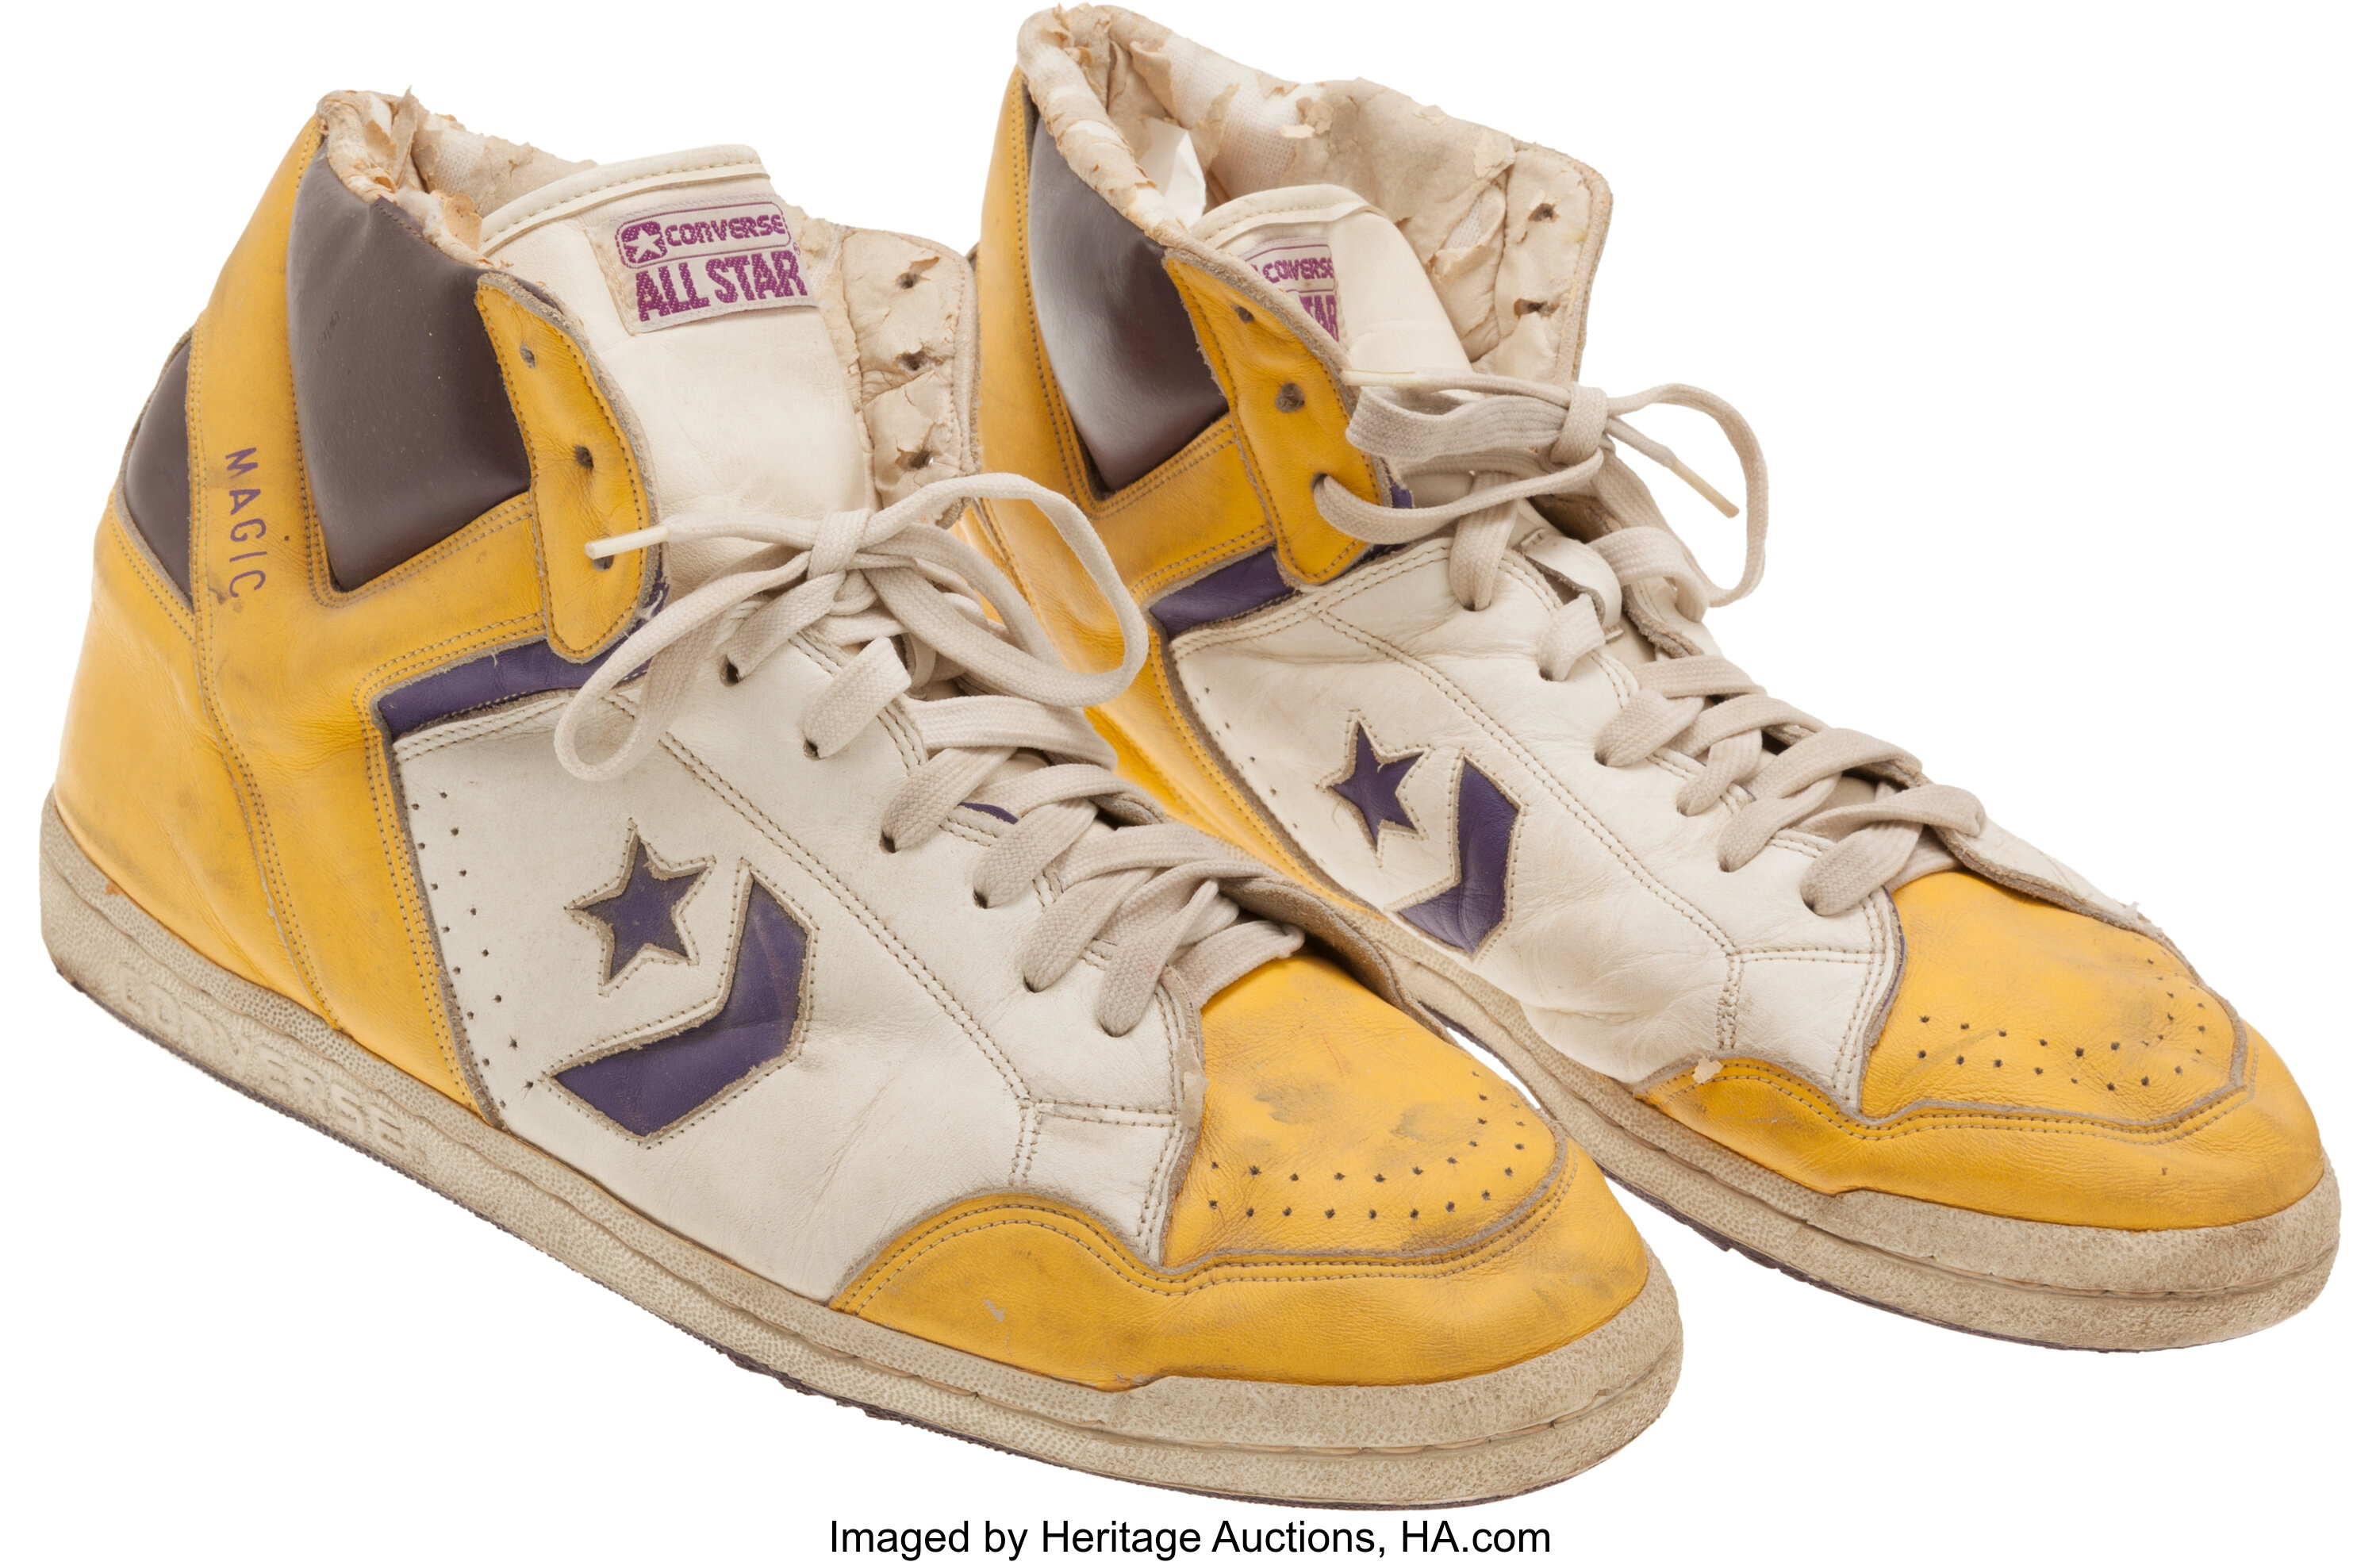 1986-87 Johnson Game Worn Converse Shoes - From Los Angeles | #80160 | Auctions